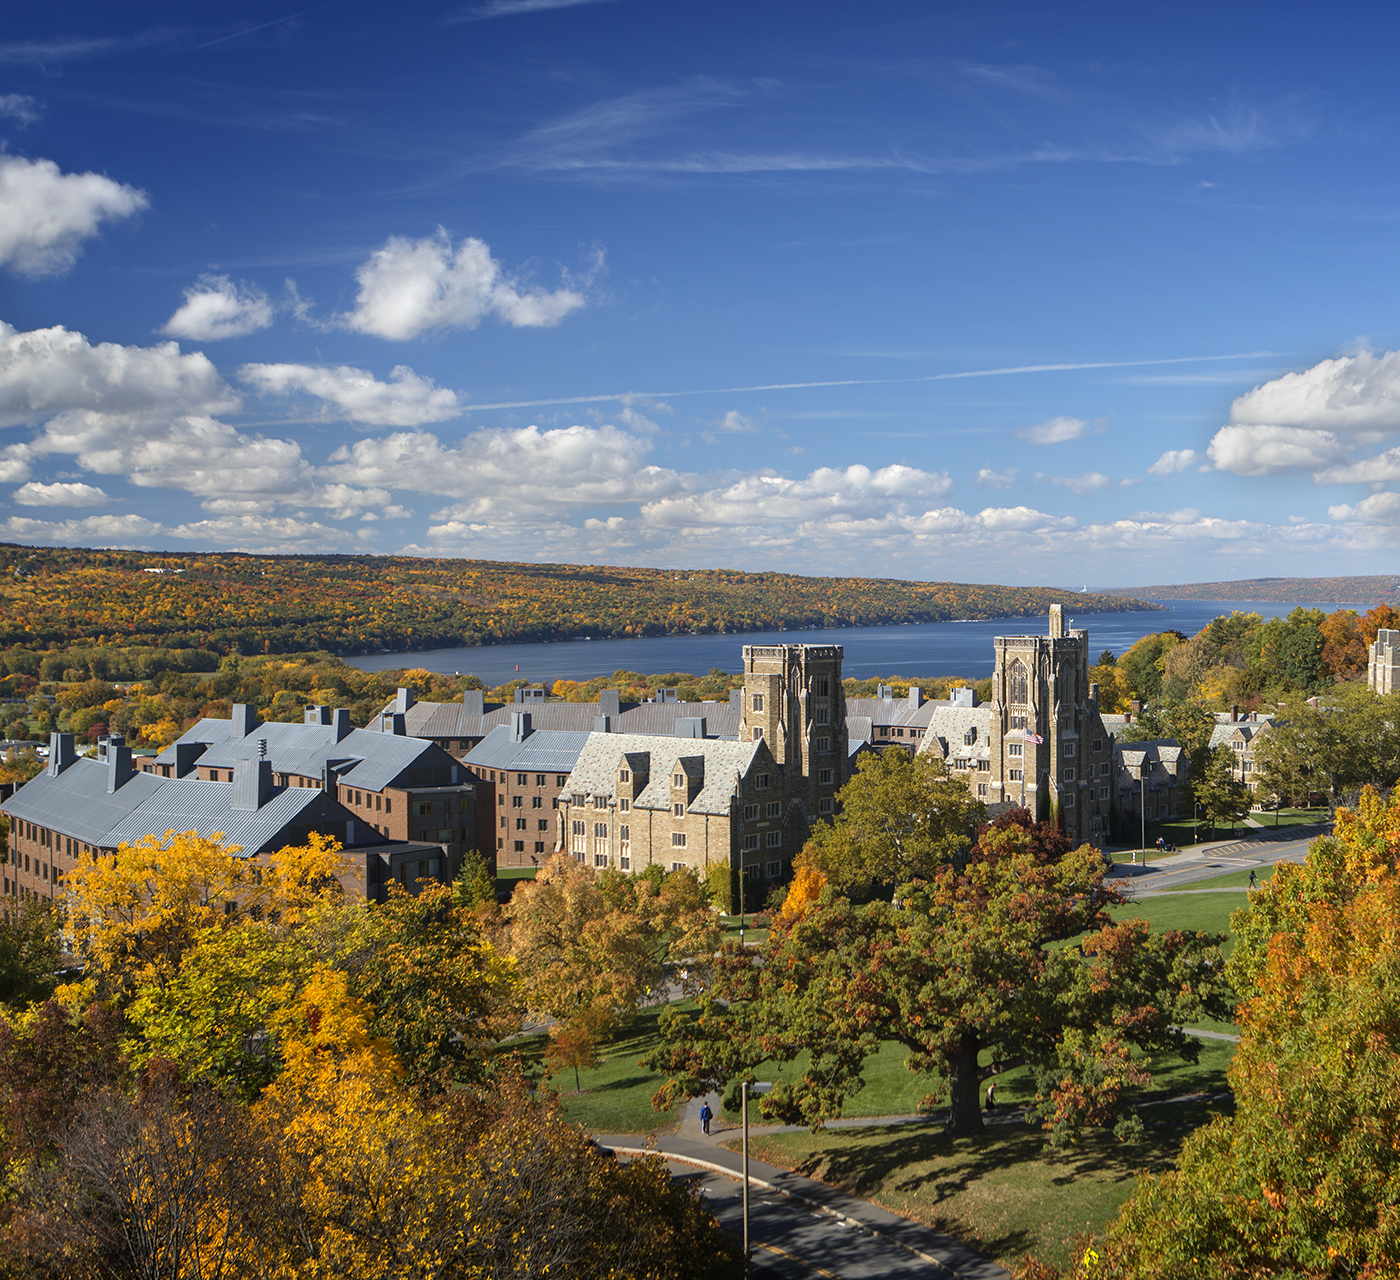 West Campus In Fall With Lake In Background Up 2016 1380 034 Select Cropped 0 